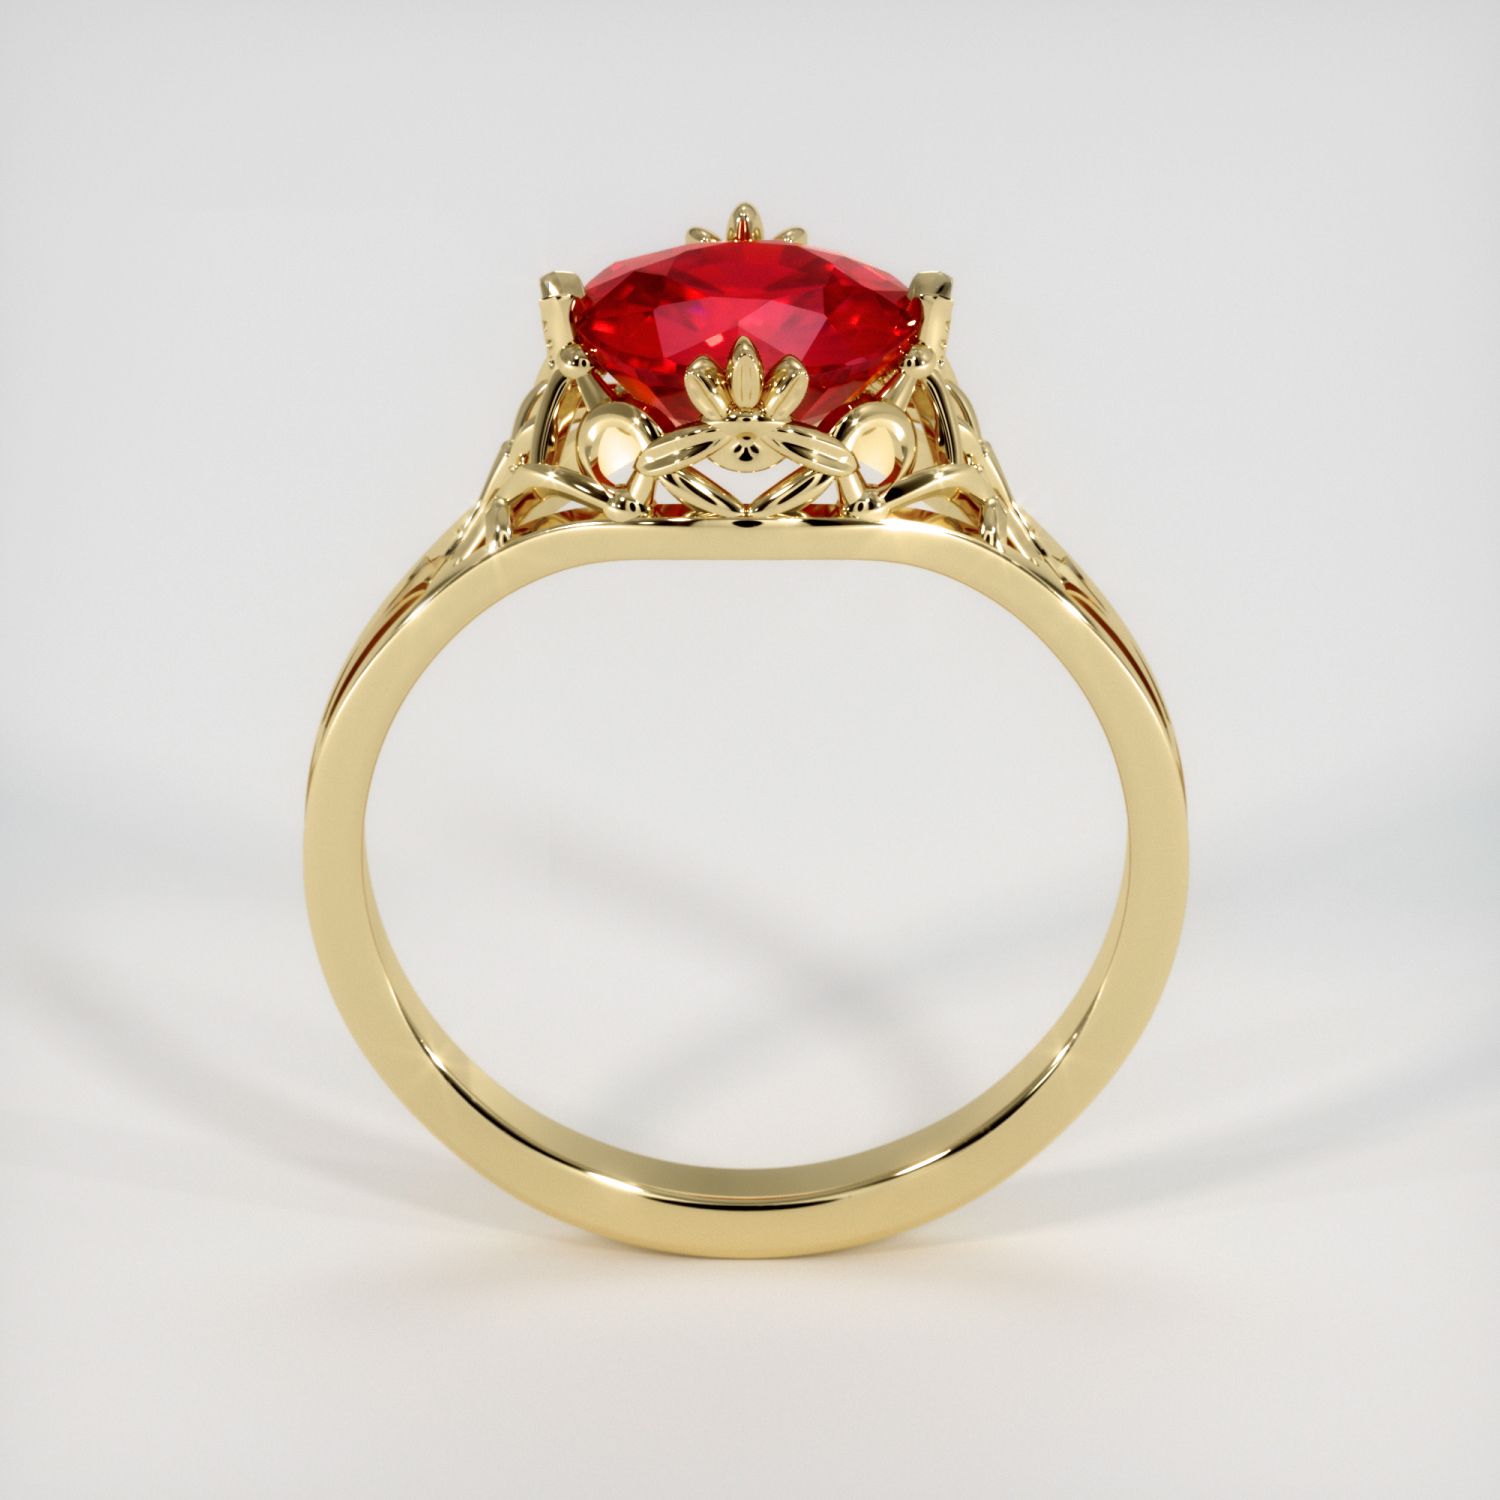 Antique Style Ruby Ring 1.67 Ct., 18K Yellow Gold